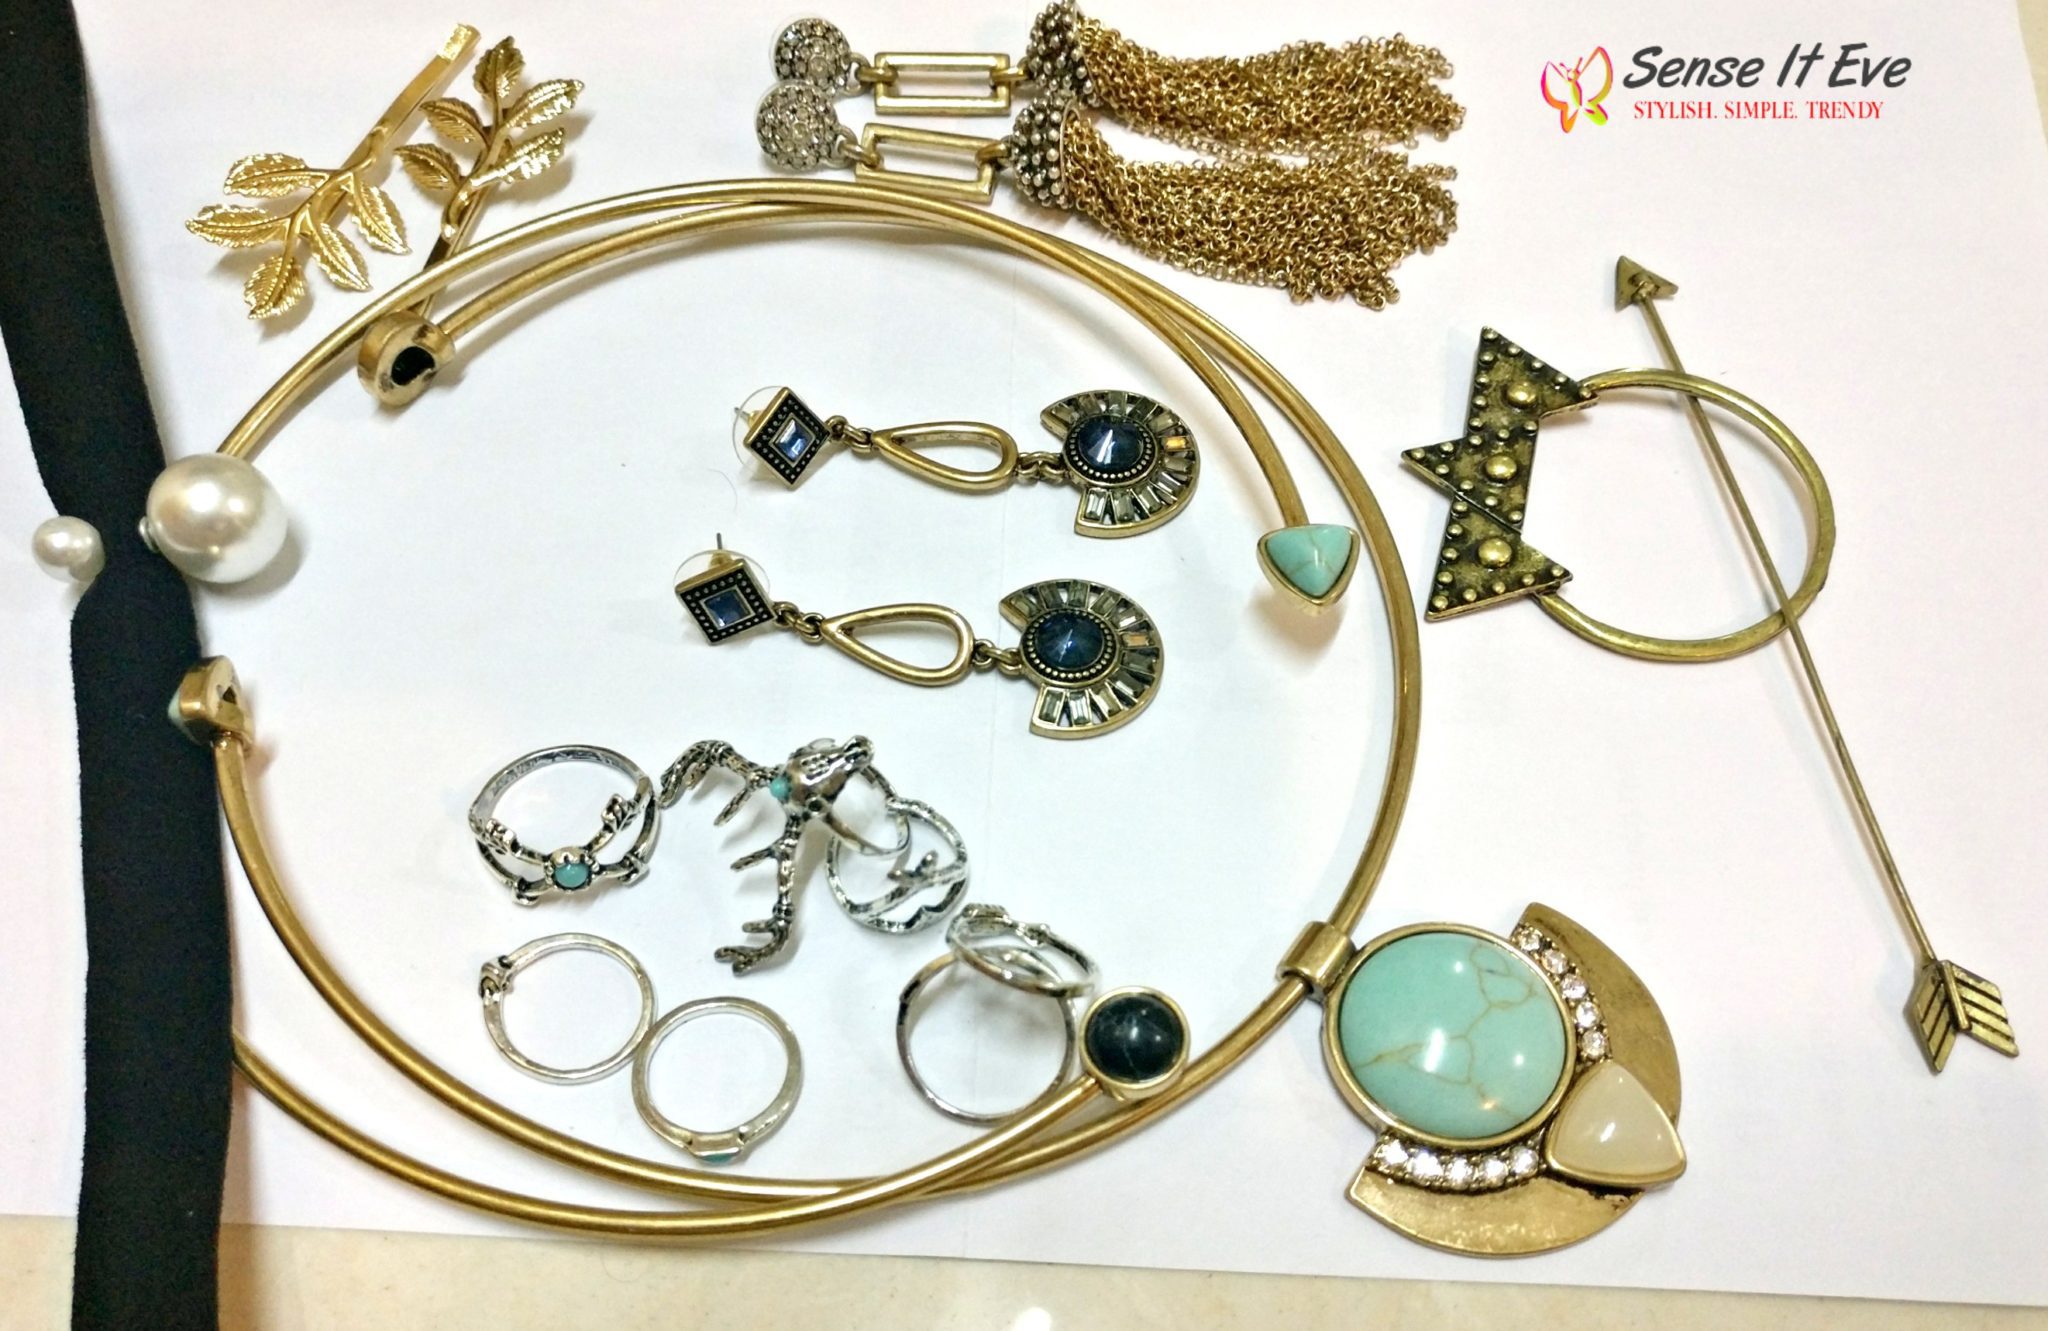 damsel code online jewelry review Sense It Eve Decoding Fashion Jewelry with Damsel Code